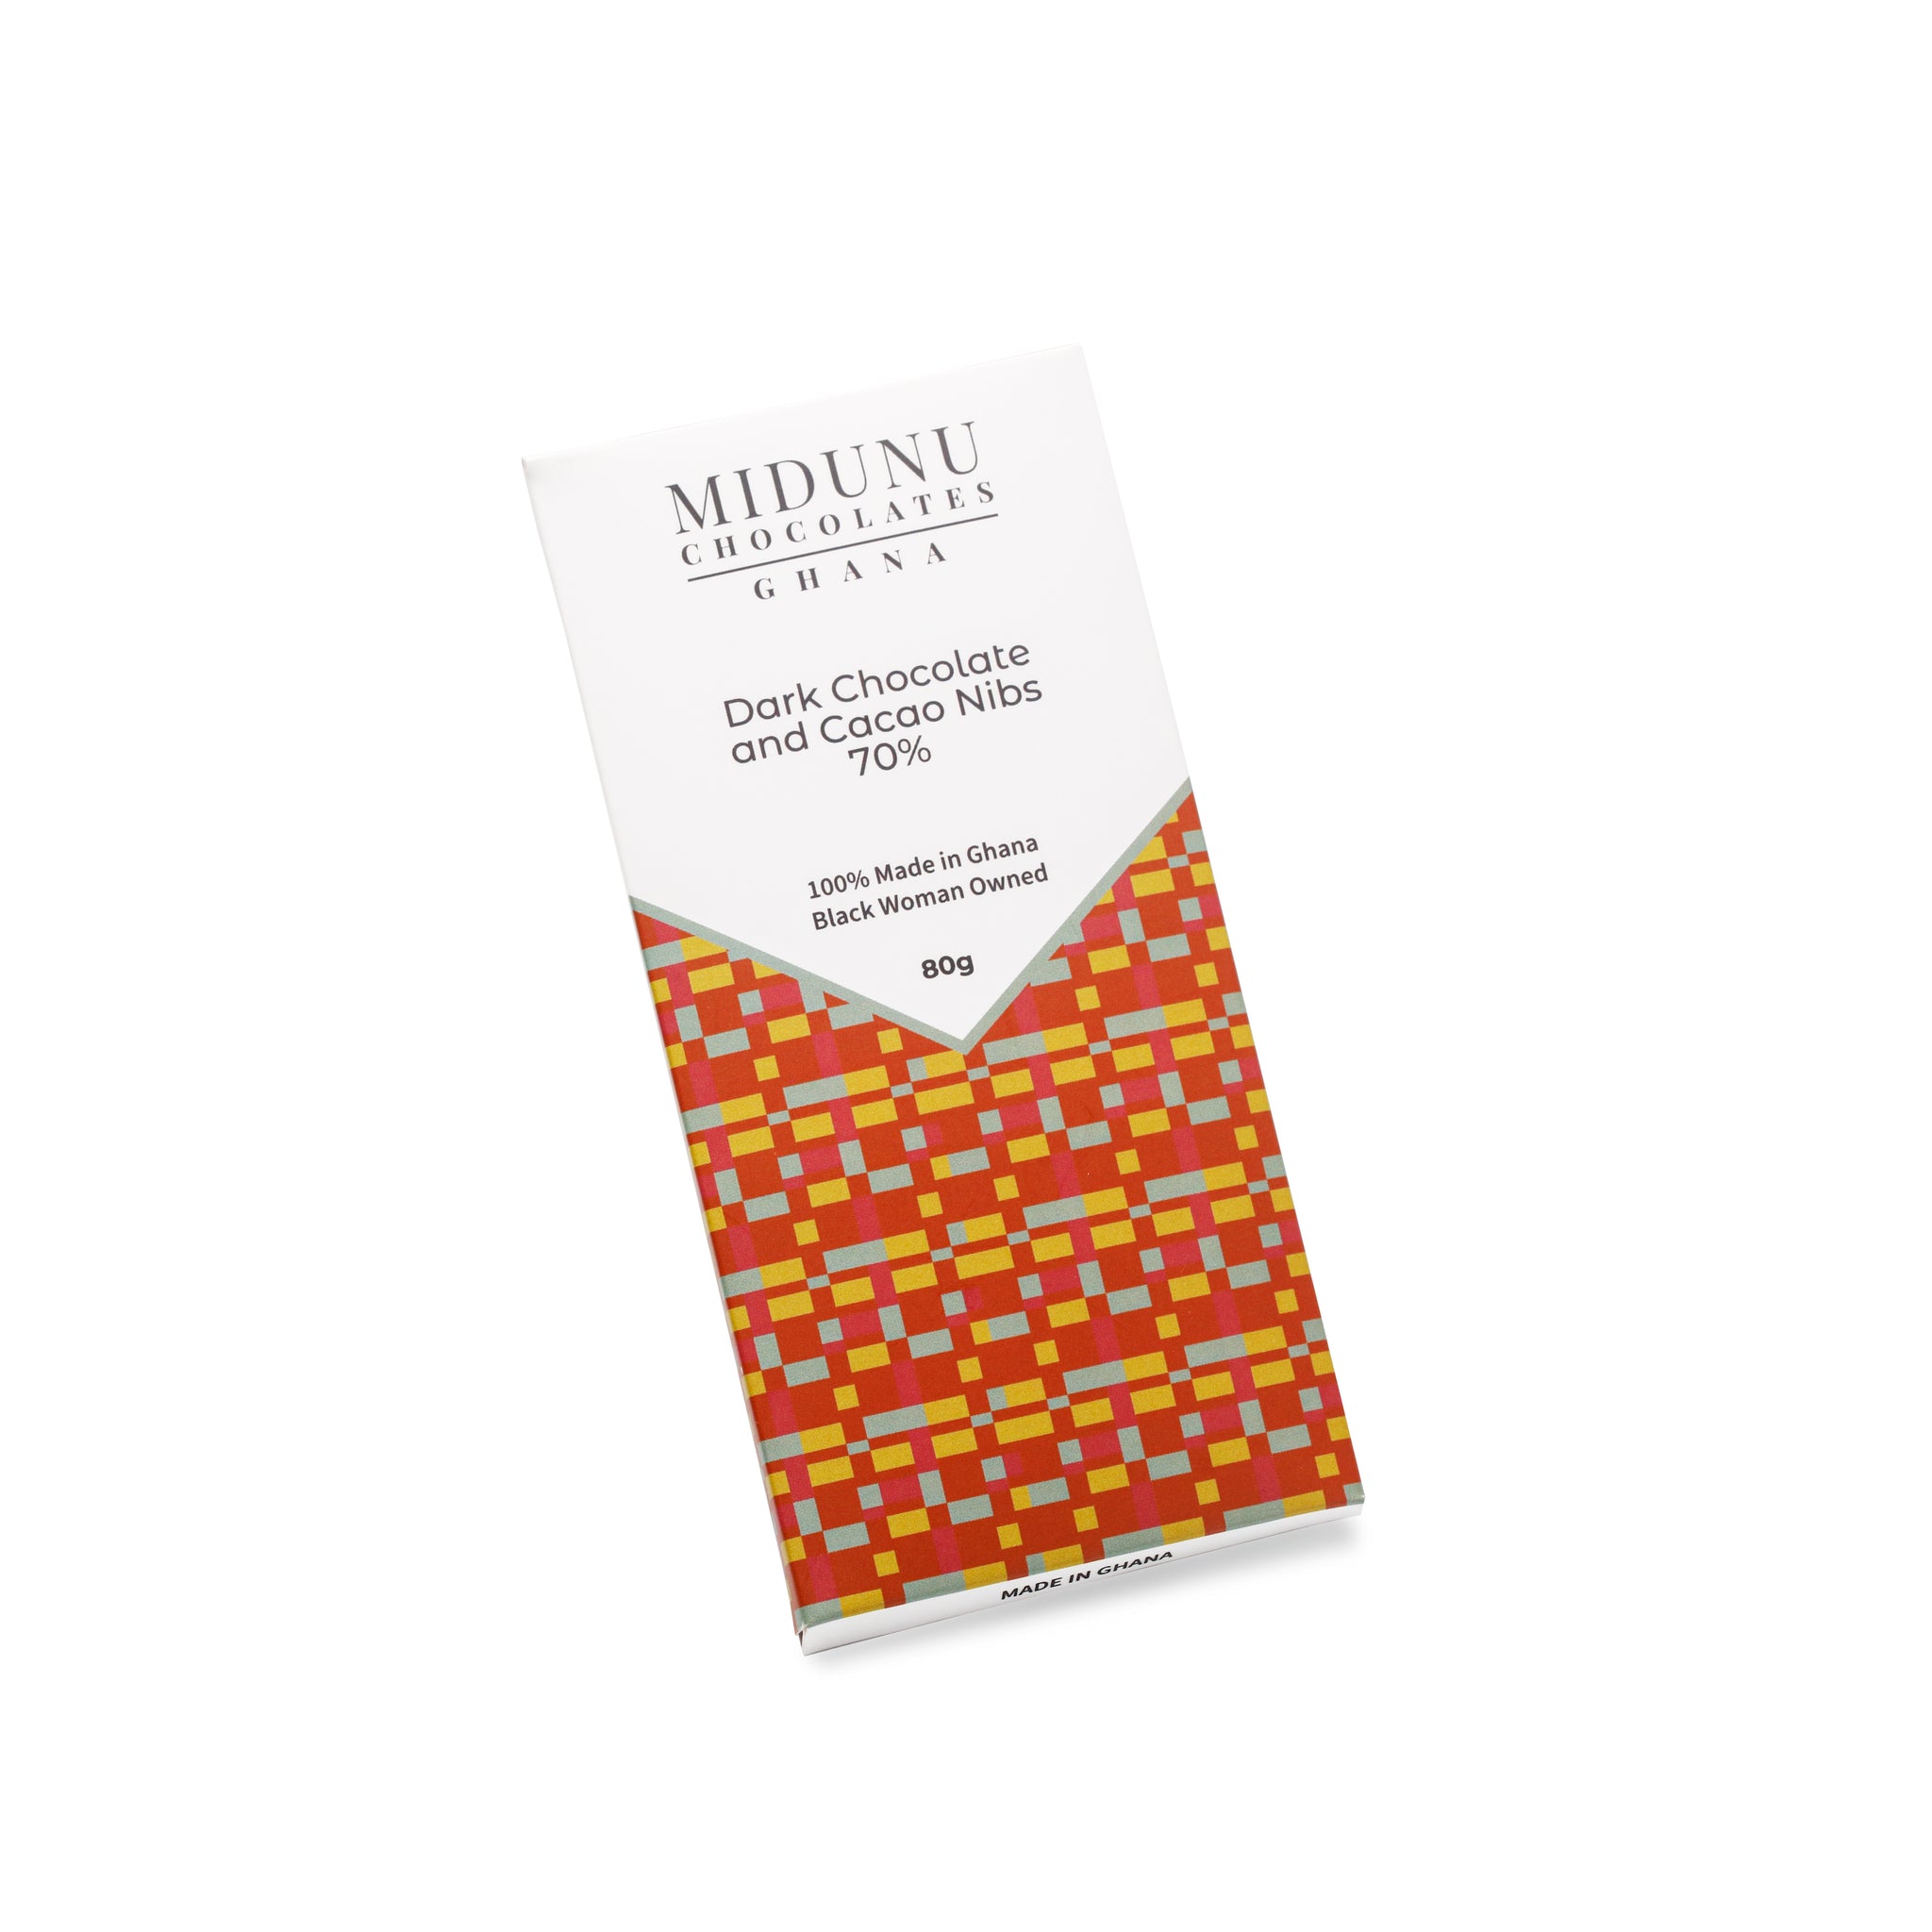 Midunu Chocolates are created by an award winning chef in Accra, Ghana. The traditional method of fermenting cocoa beans in plantain and banana leaves instills a unique flavor.  In this single origin bar, expect intense cacao notes.